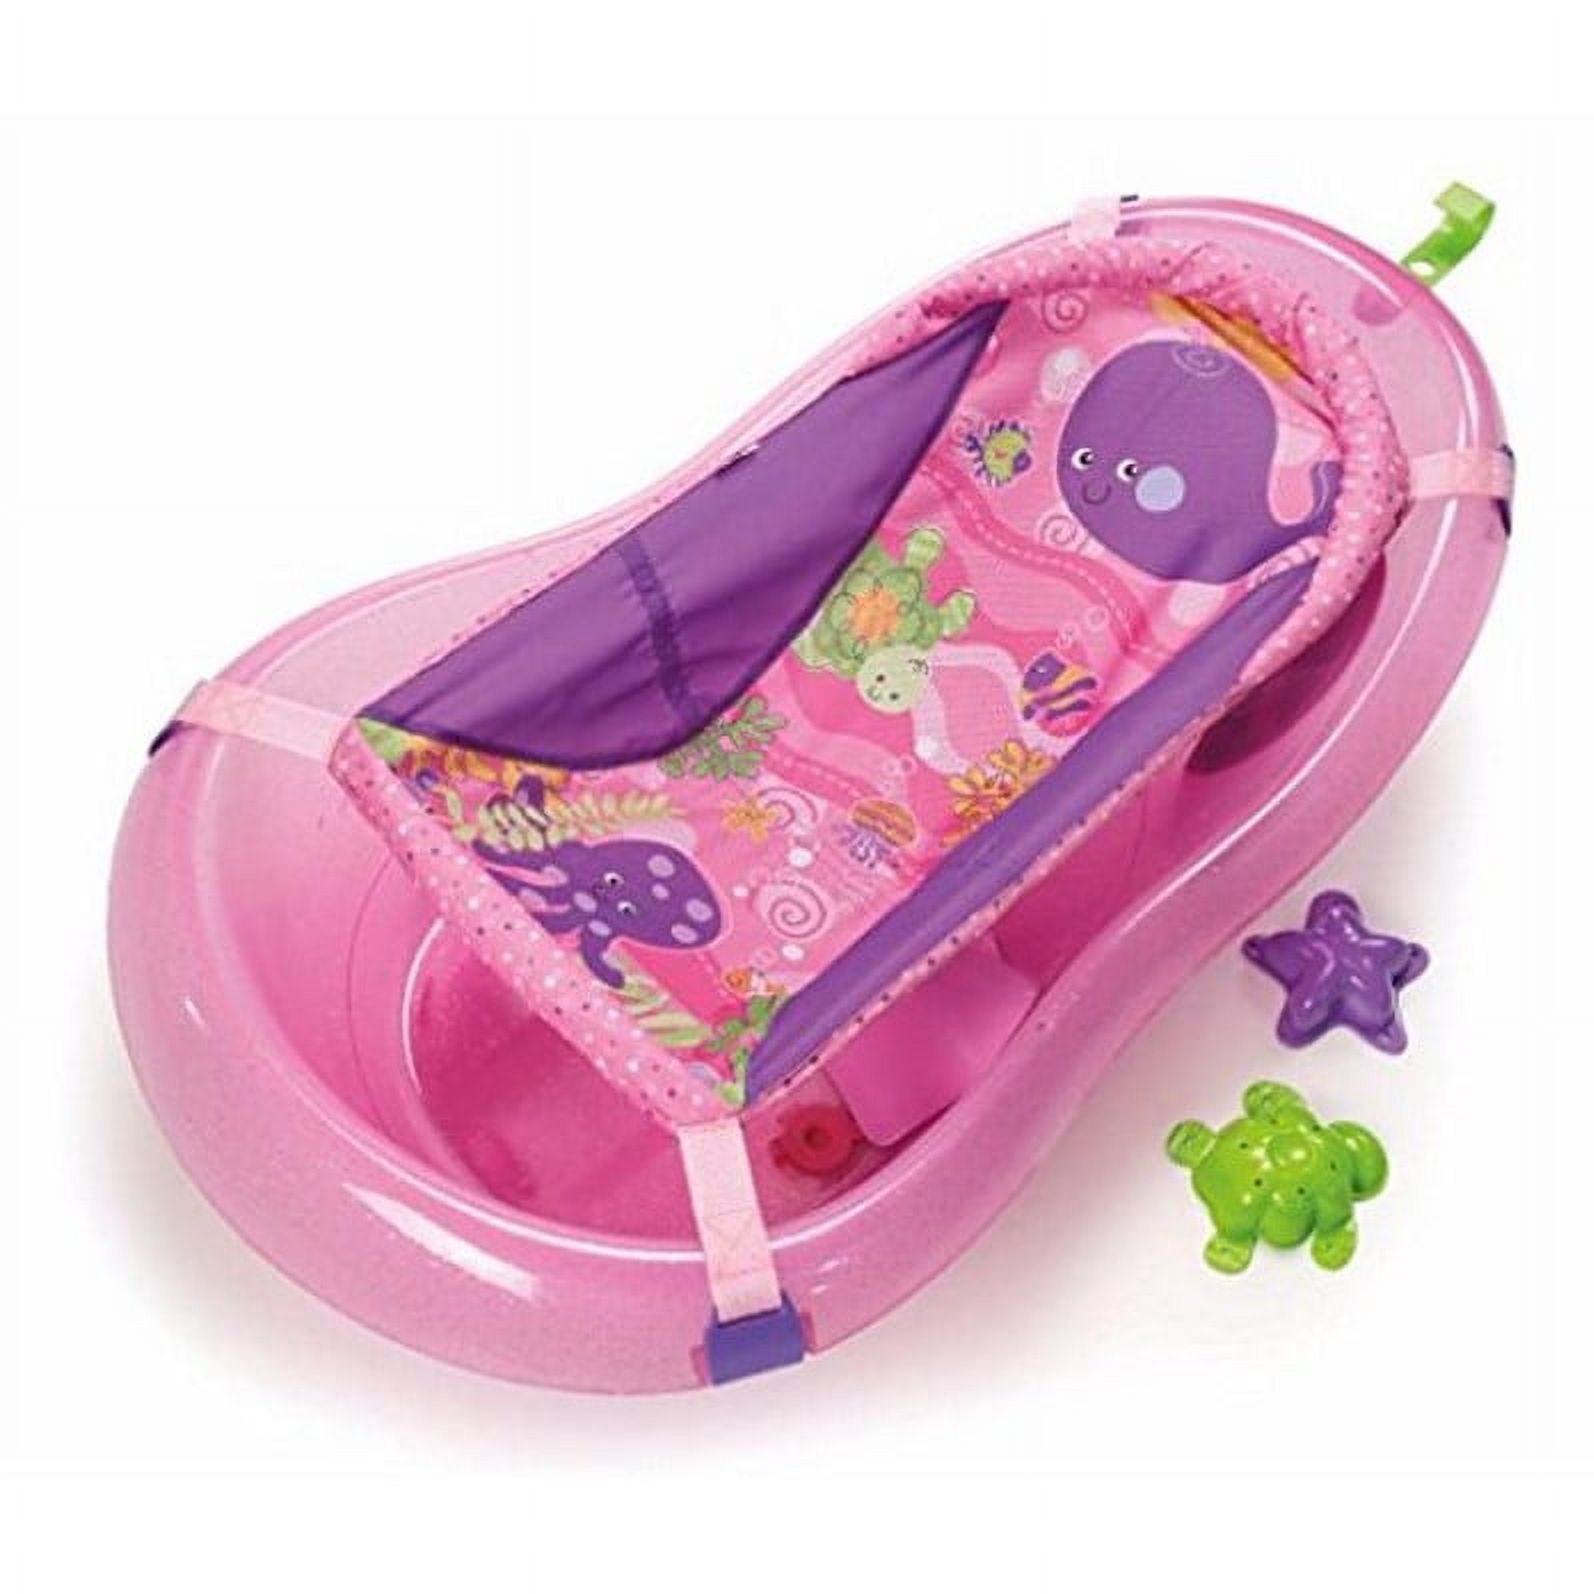 Fisher-Price Pink Sparkles Tub - image 1 of 5